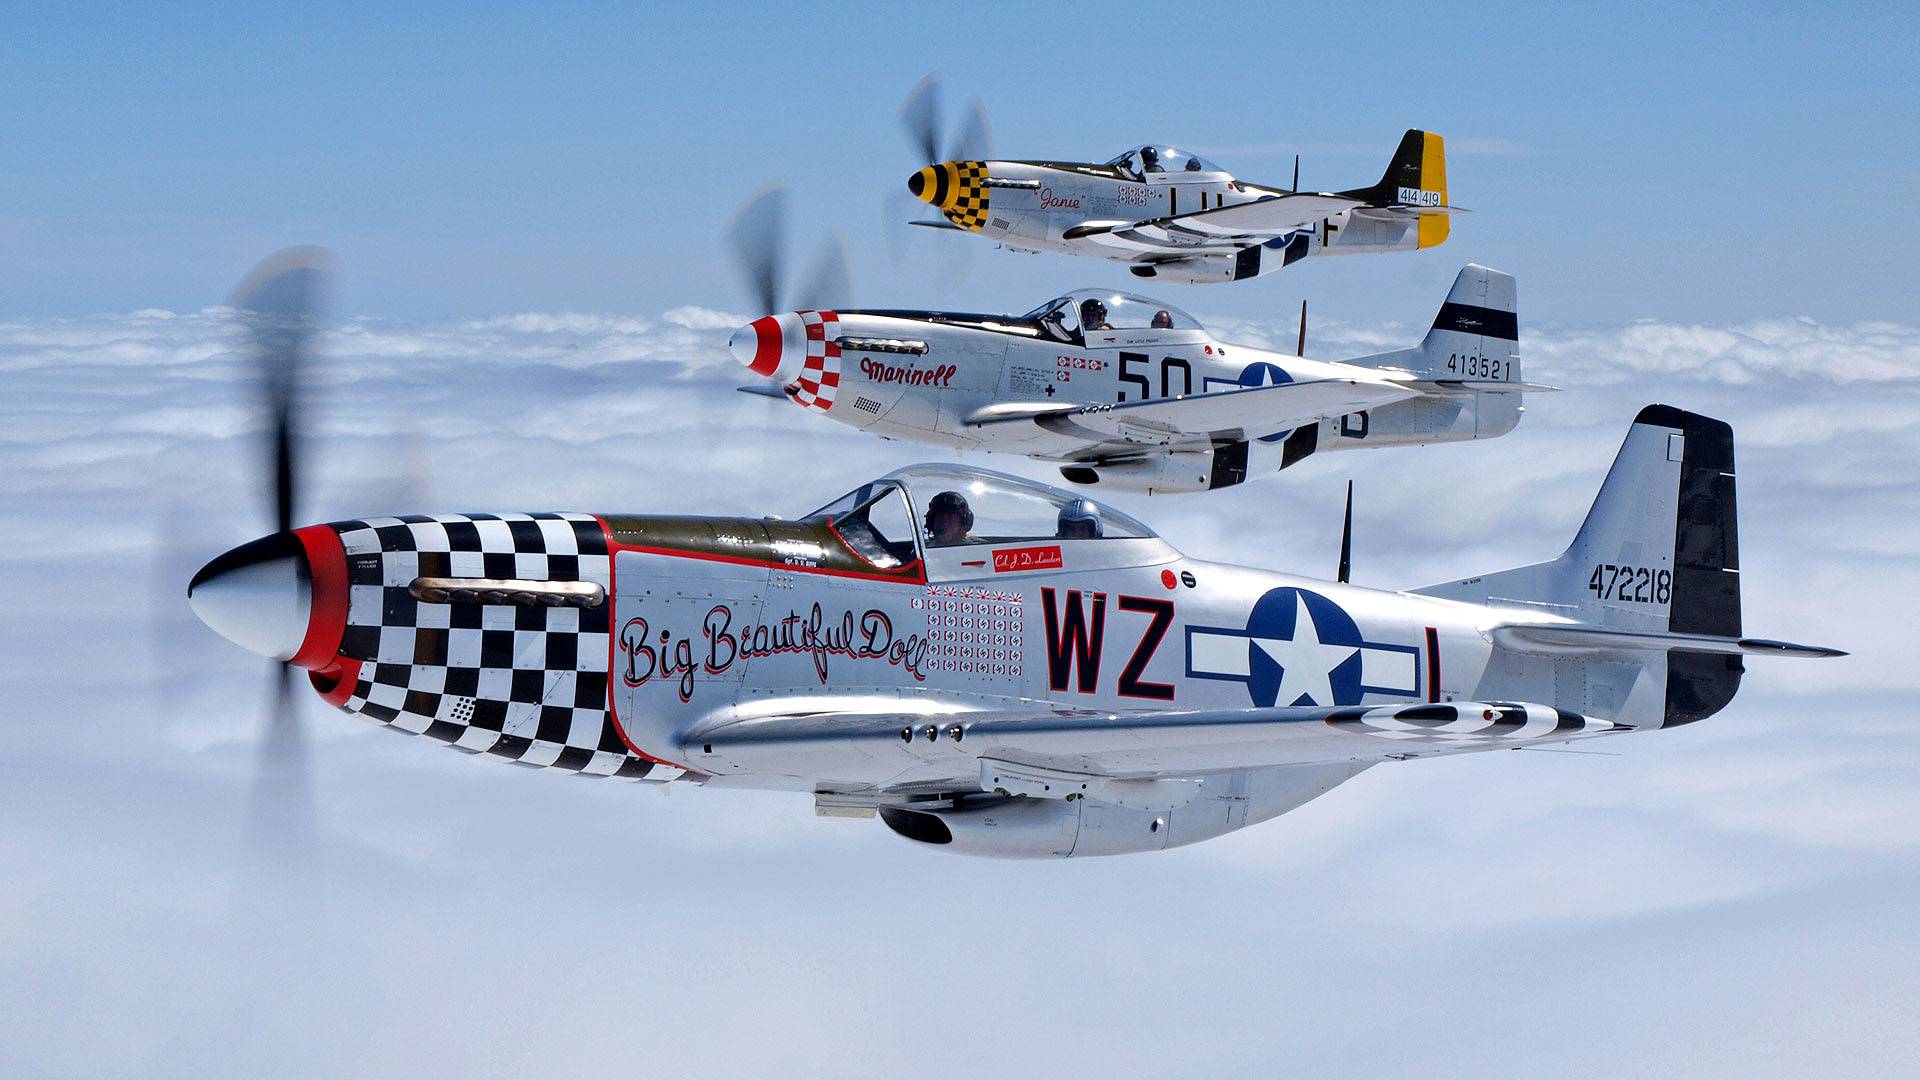 Planes p 51 mustang wallpaper - (#17436) - High Quality and ...